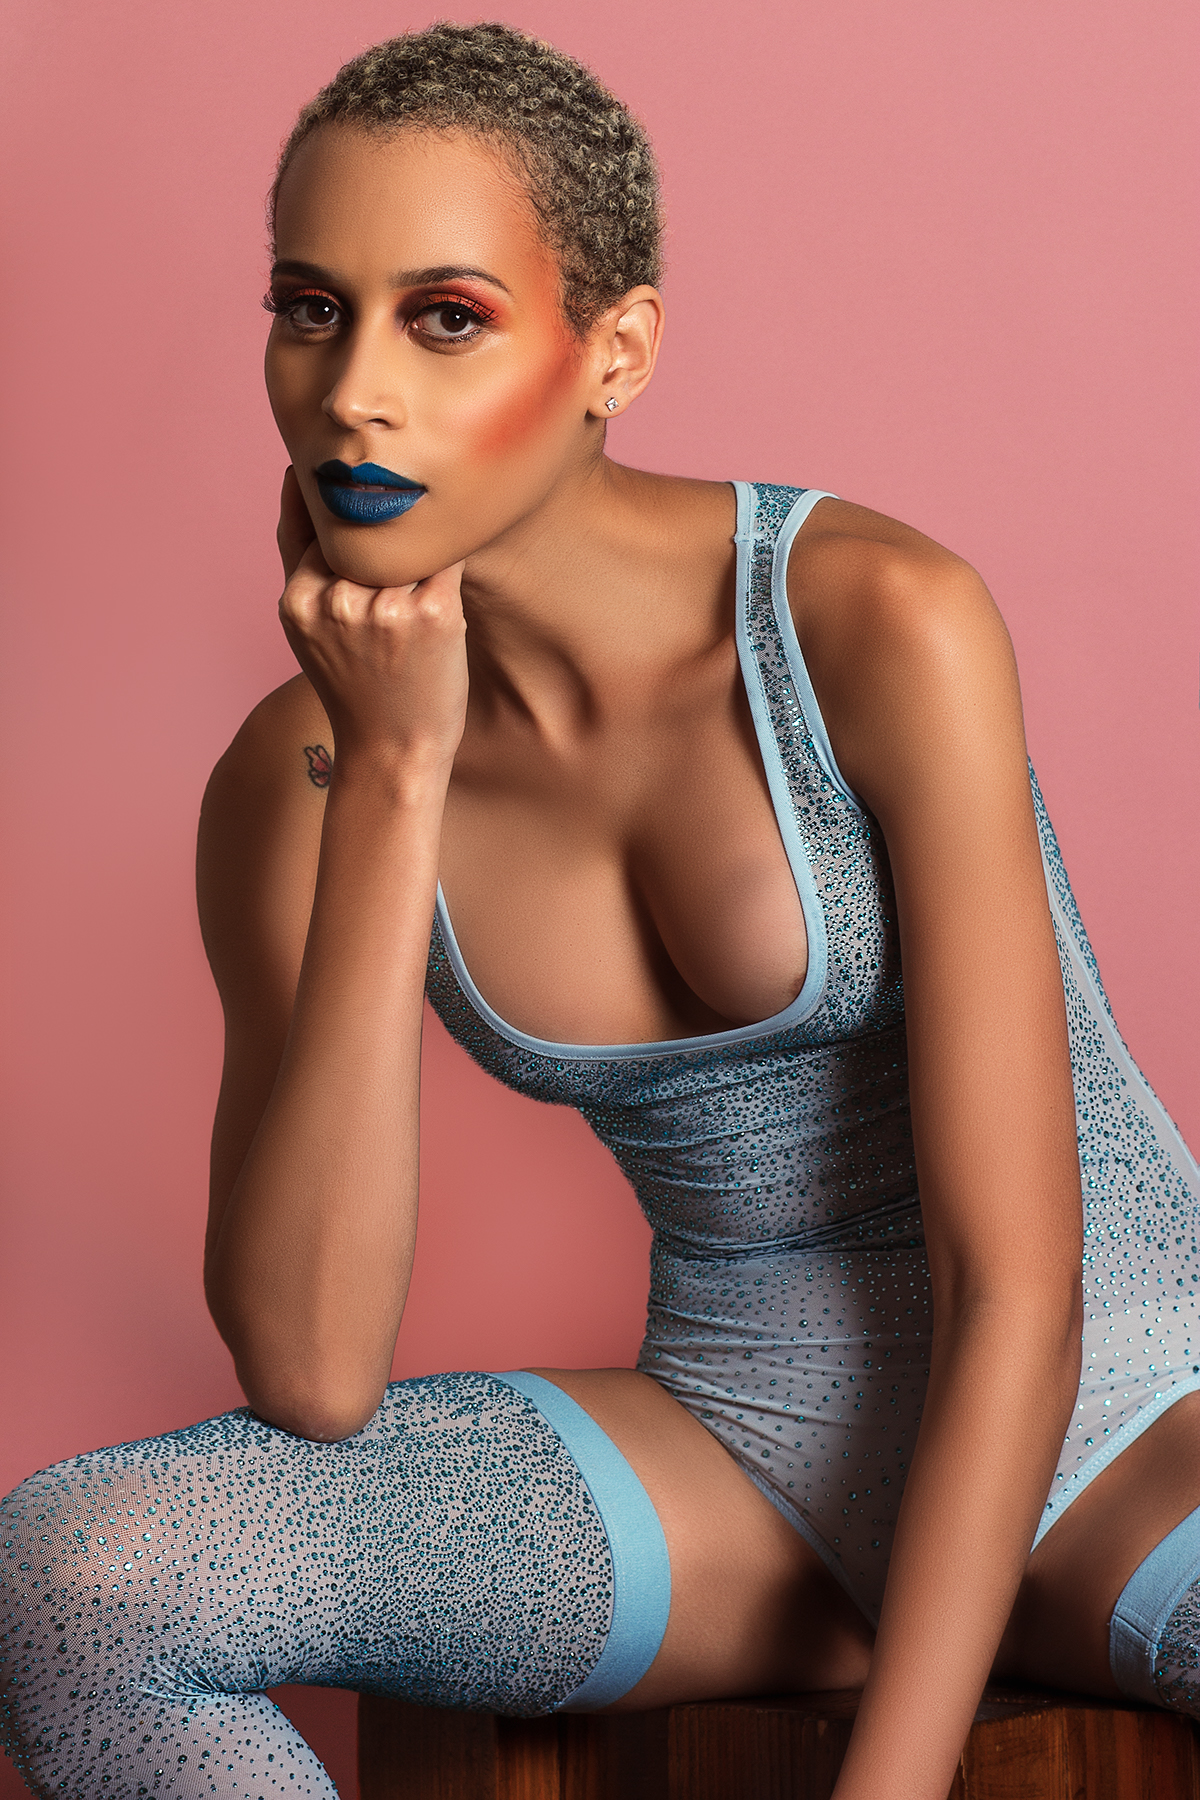 Amazing Isis King for Ellements magazine, March 2017. 